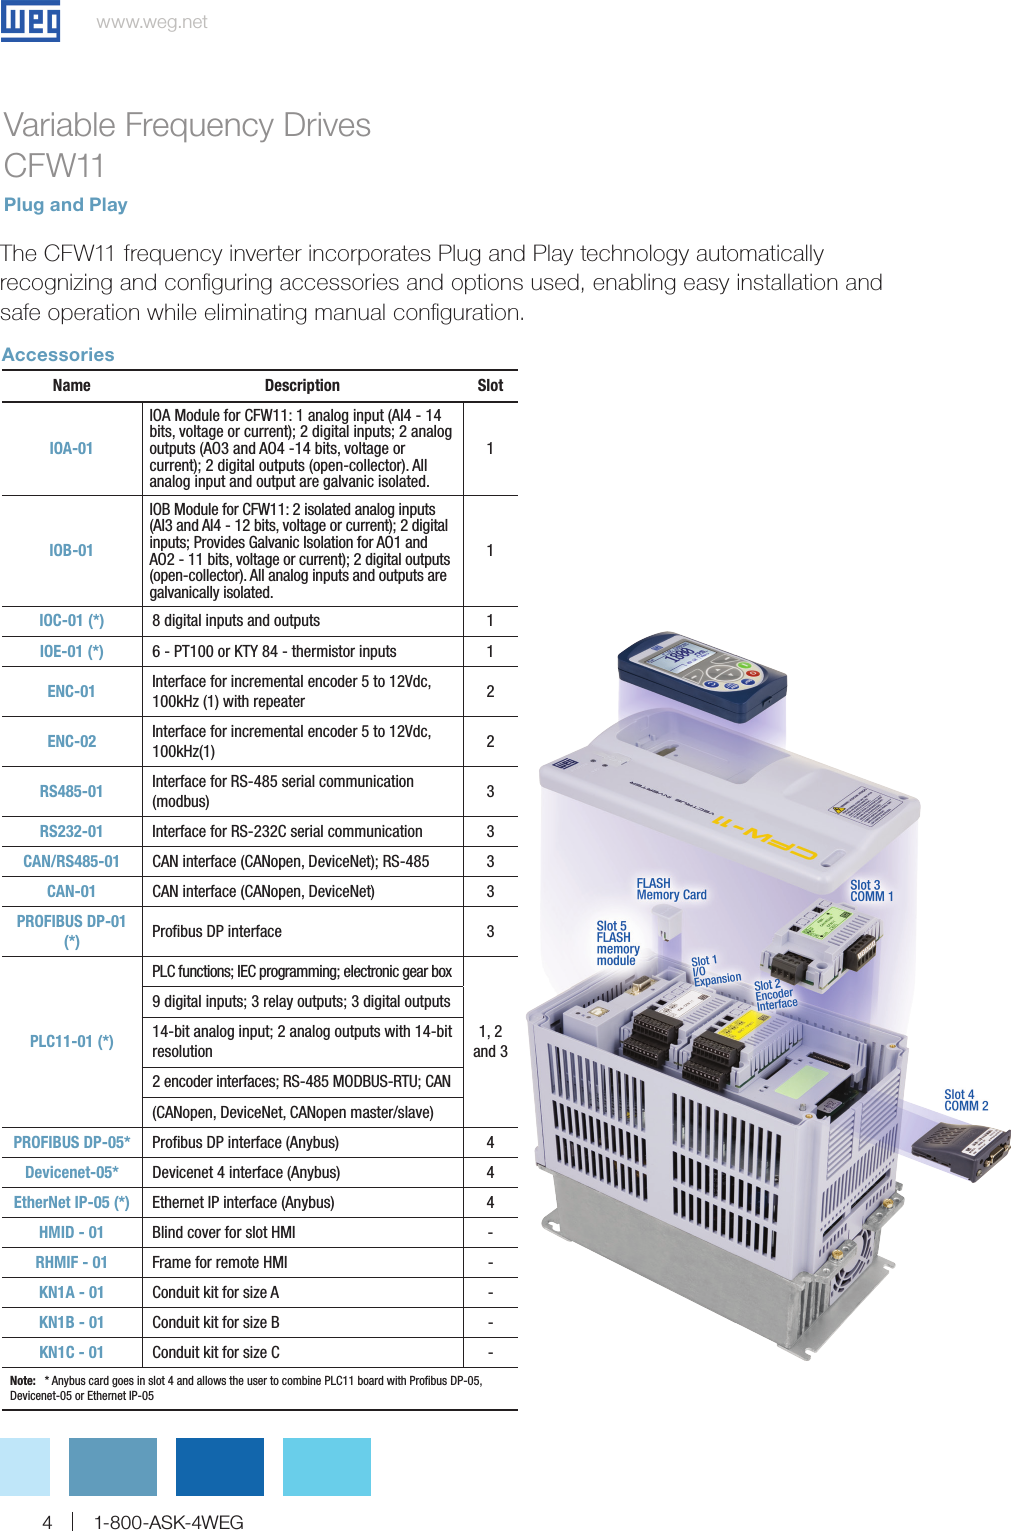 Page 4 of 12 - 103146 1 Weg Variable Frequency Drive Brochure User Manual